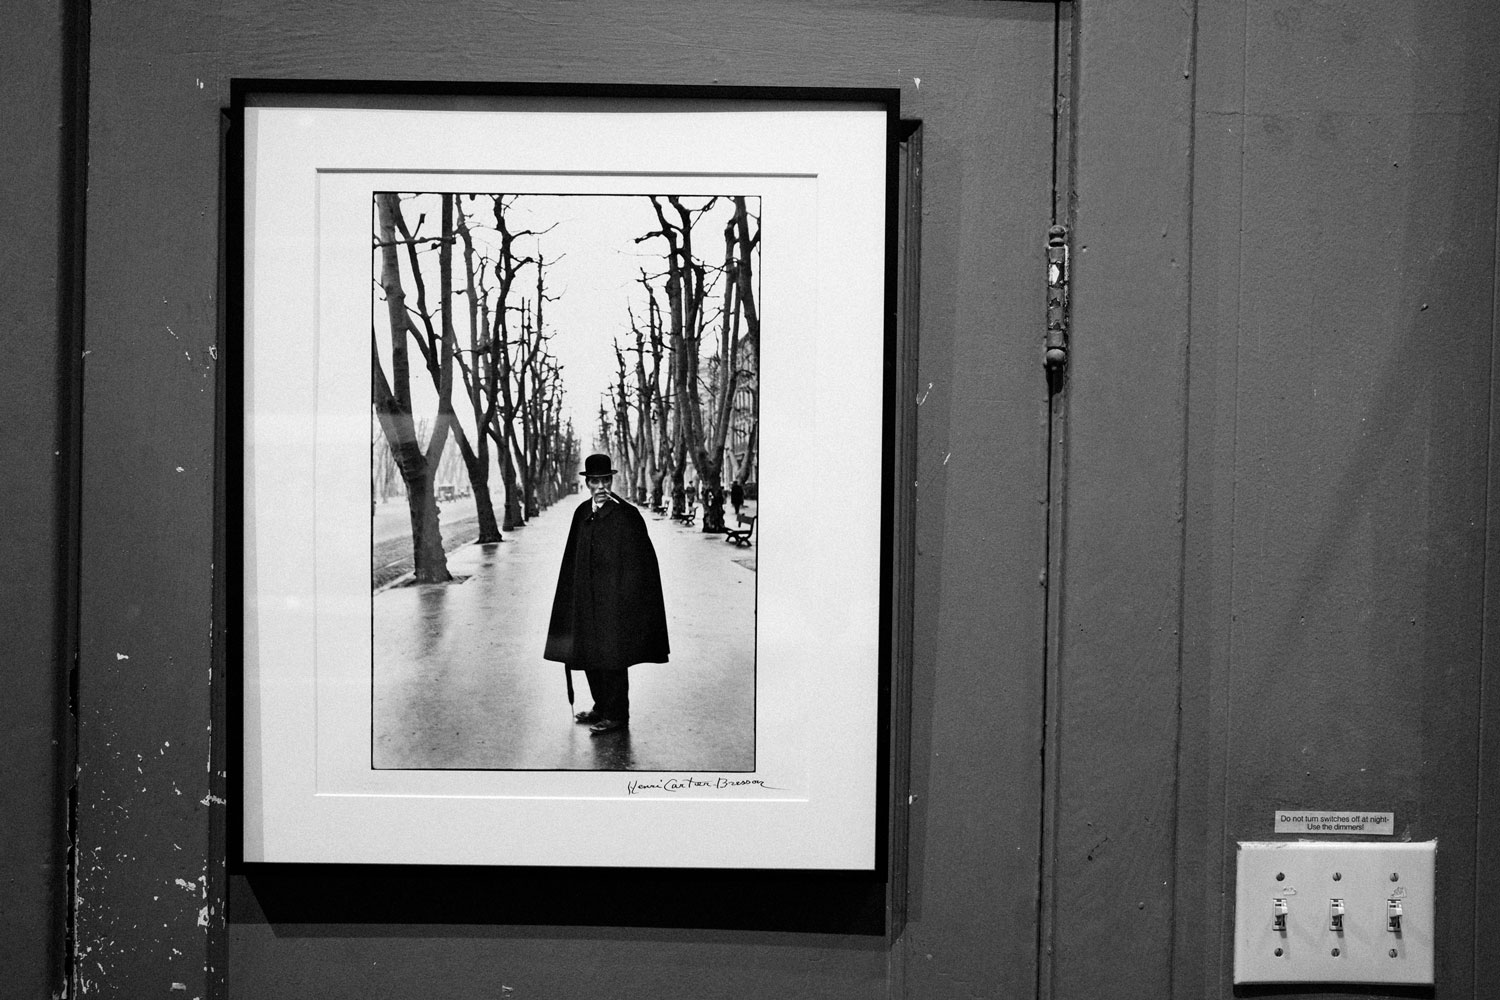 Black and white photo of a black framed photograph hanging from a painted wooden door. The vertical photograph is mounted on white paper and is of a man standing in the middle of an eerie and wet tree-lined street. The man is staring at the camera while a cigarette dangles from his mouth. He is wearing a suit under a black duster coat and a bowler hat and holding a closed umbrella. A small black signature is scrawled in the bottom right corner of the mounted paper.